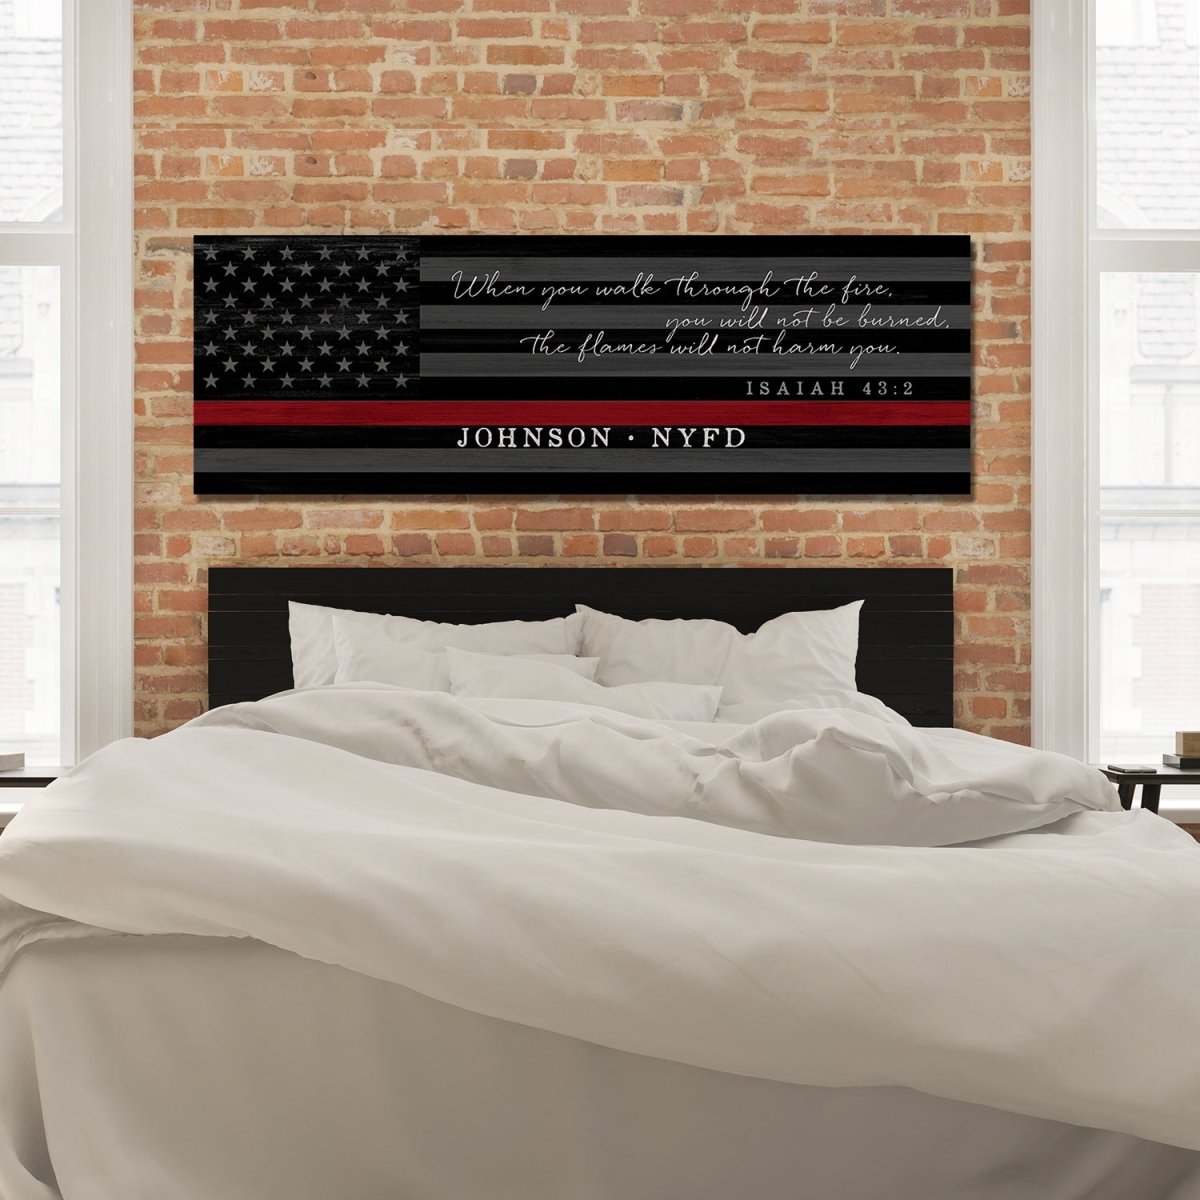 Personalized Firefighter Sign With Bible Scripture Above Bed - Pretty Perfect Studio